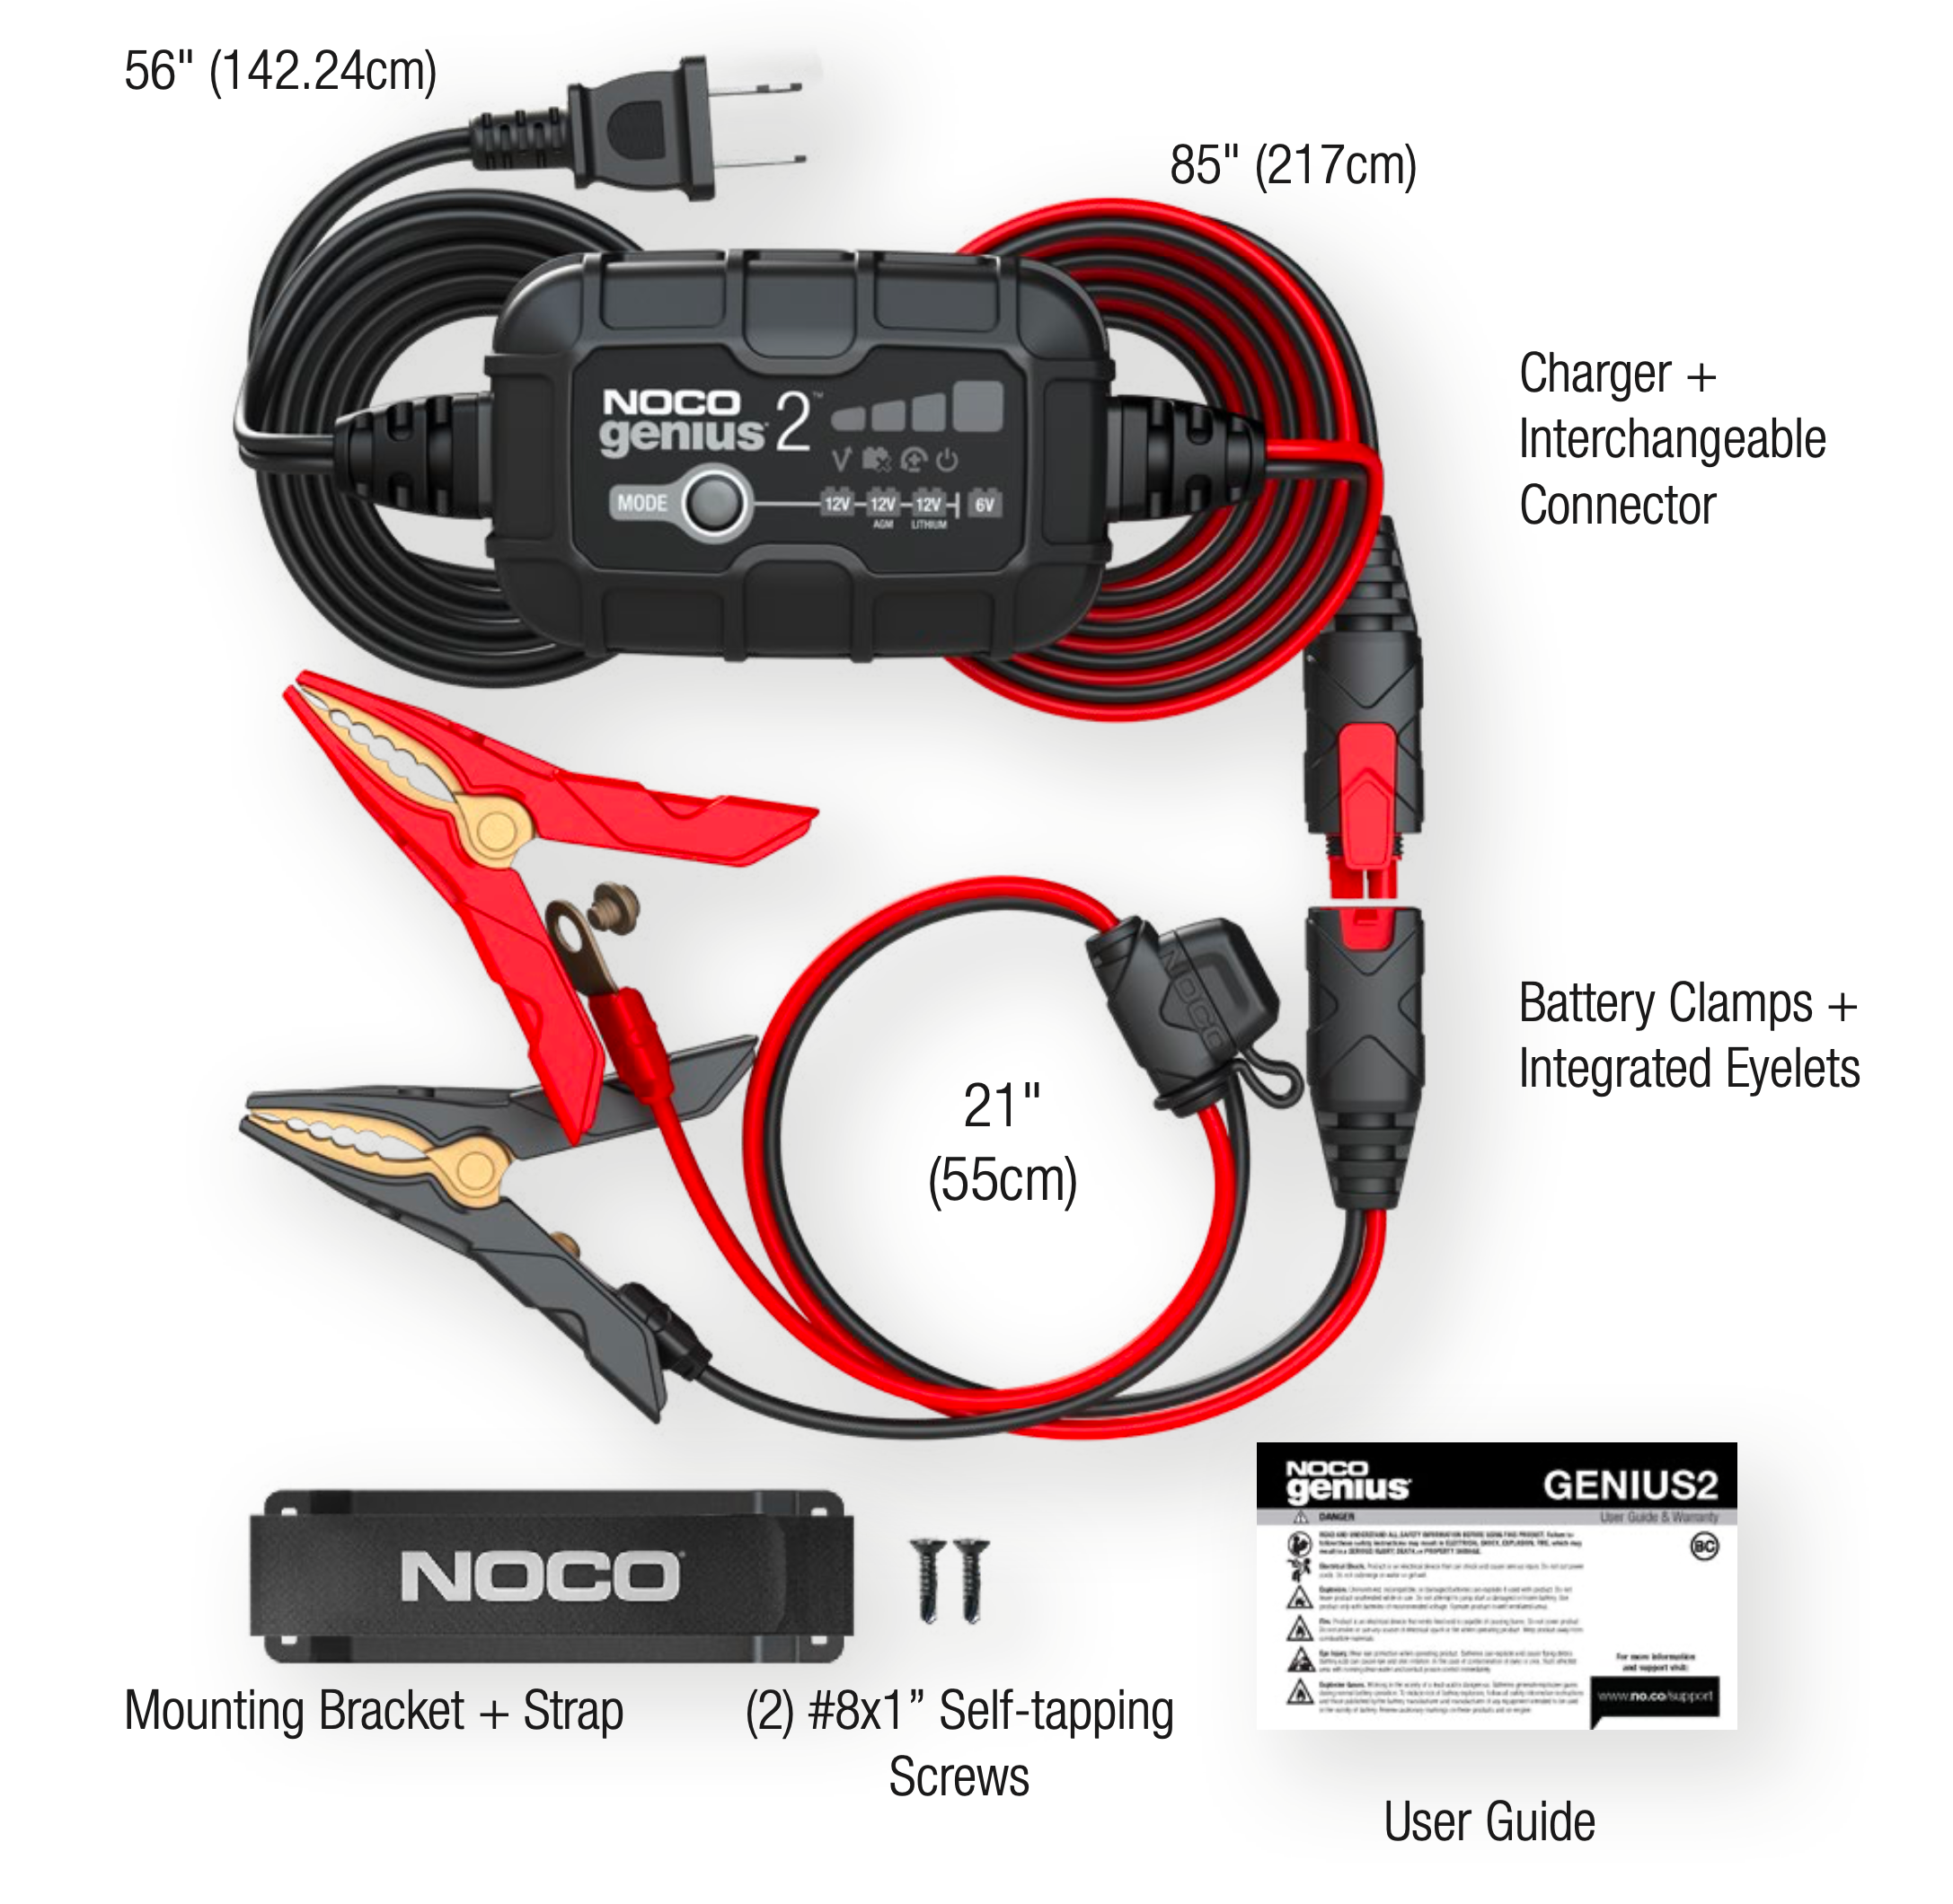 Noco Genius 2 Battery Charger + Maintainer | Battery Guys